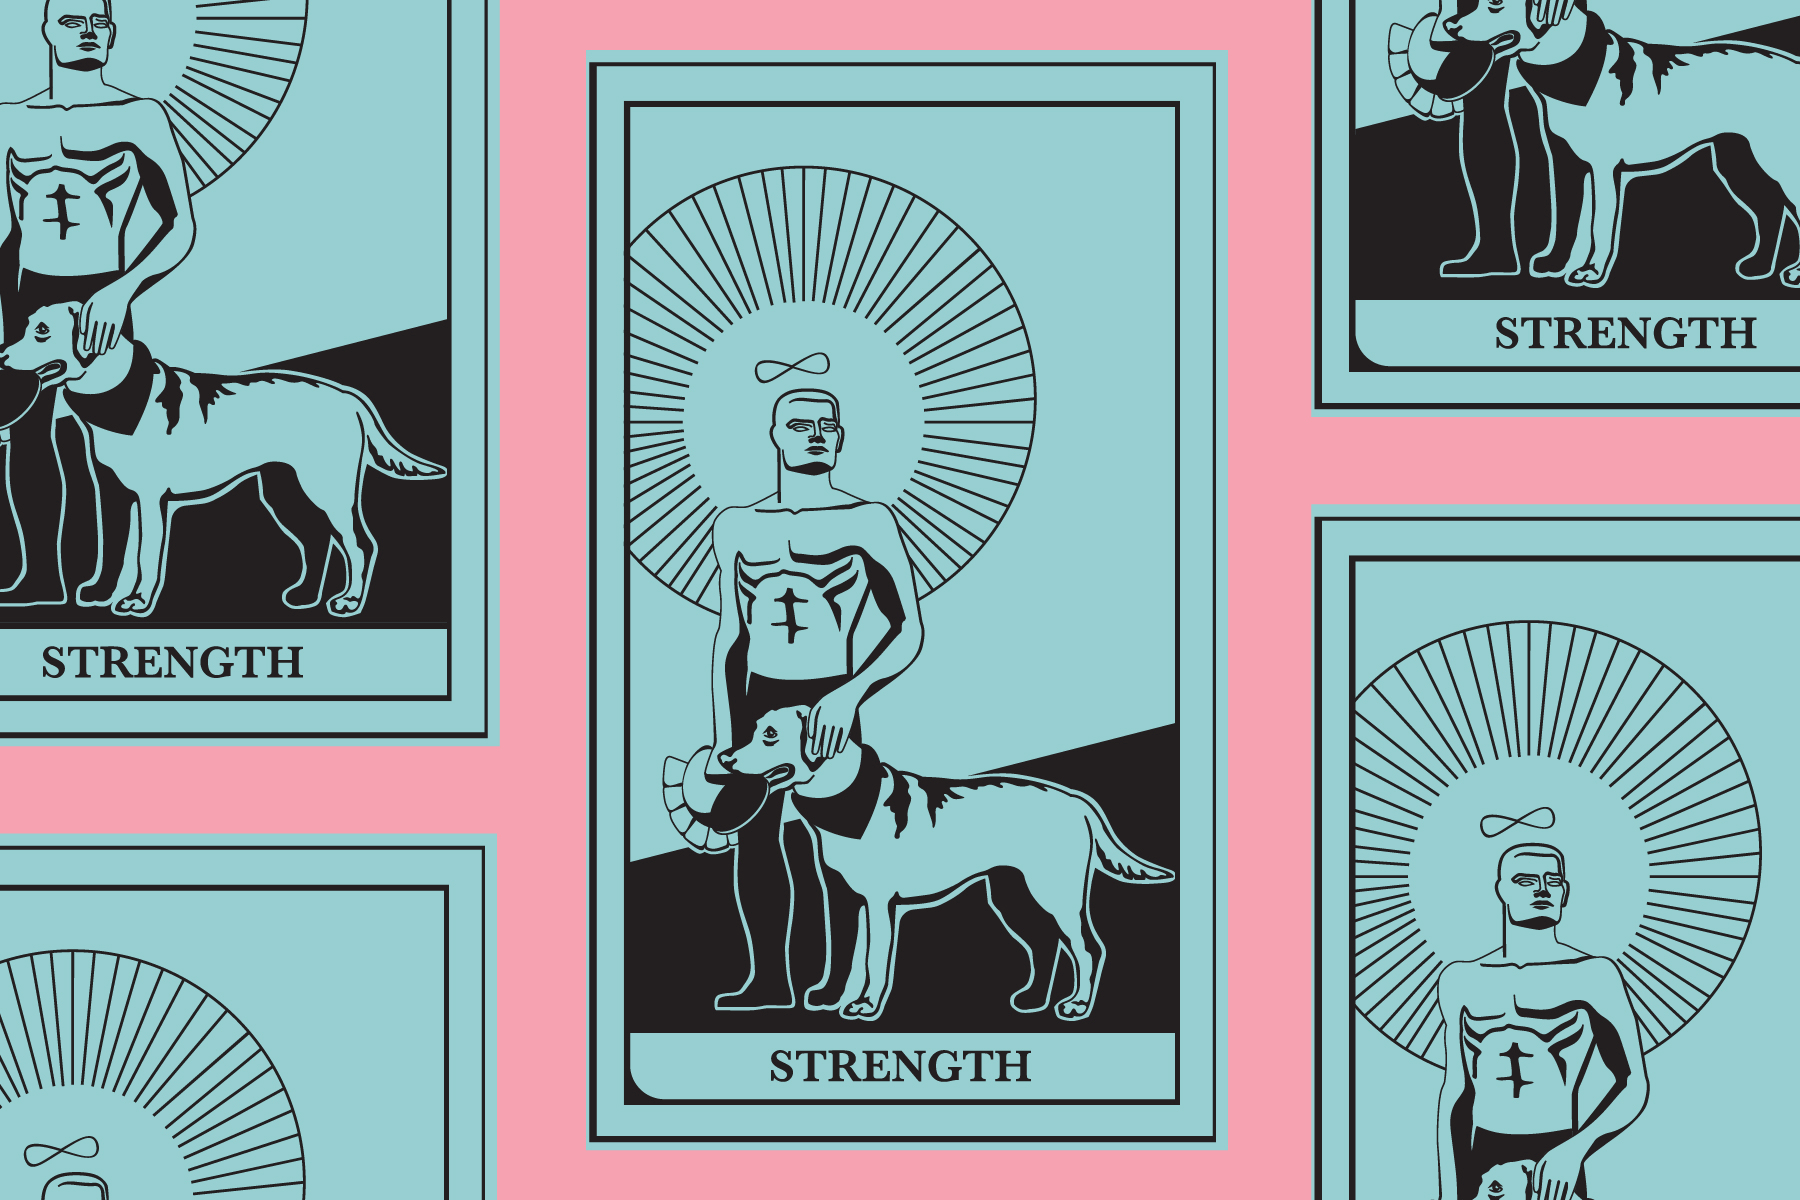 A birthday tarot card-themed gif of the MSU Broad Art Museum, Sparty Statue, and Zeke the Wonderdog.